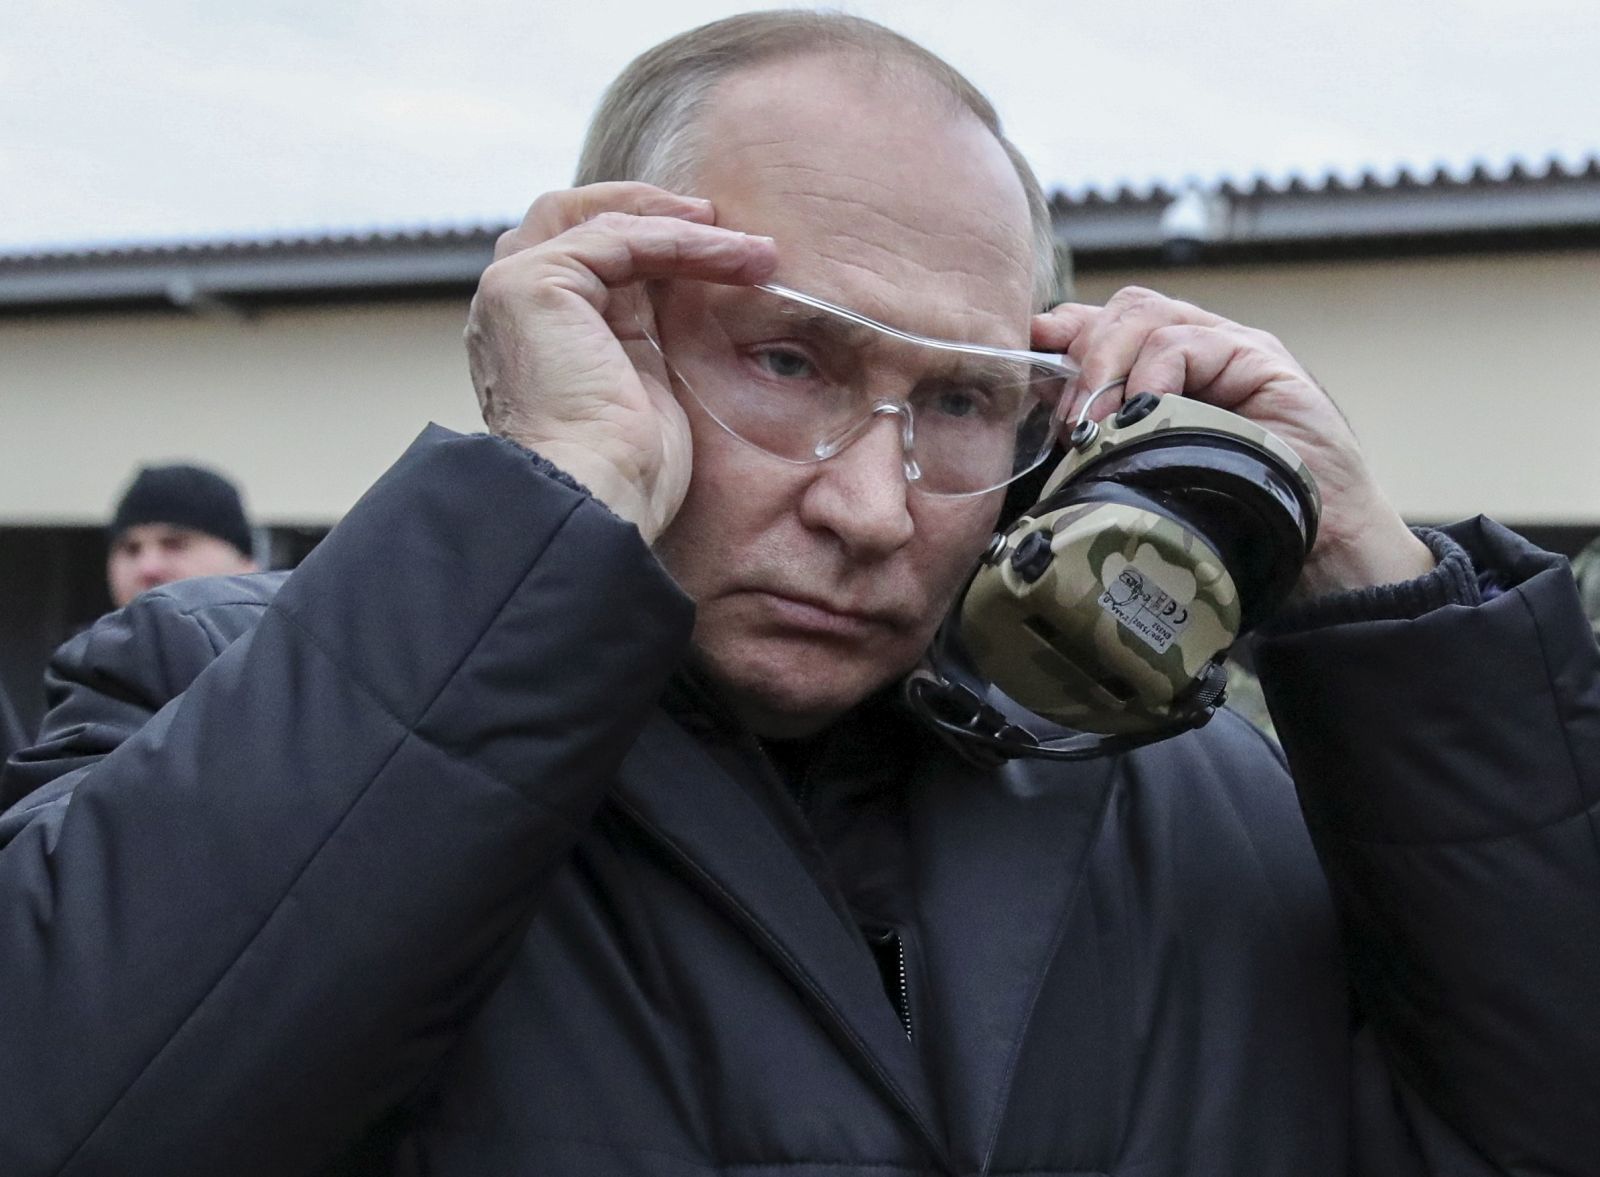 epa10255165 Russian President Vladimir Putin puts on tactical glasses as he inspects the progress of mobilized servicemen's training at a training range of the Western Military District in the Ryazan region, Russia, 20 October 2022. Russian President Putin announced in a televised address to the nation on 21 September, that he signed a decree on partial mobilization in the Russian Federation due to the conflict in Ukraine. Russian Defense Minister Shoigu said that 300,000 people would be called up for service as part of the move.  EPA/MIKHAEL KLIMENTYEV / SPUTNIK / KREMLIN POOL MANDATORY CREDIT